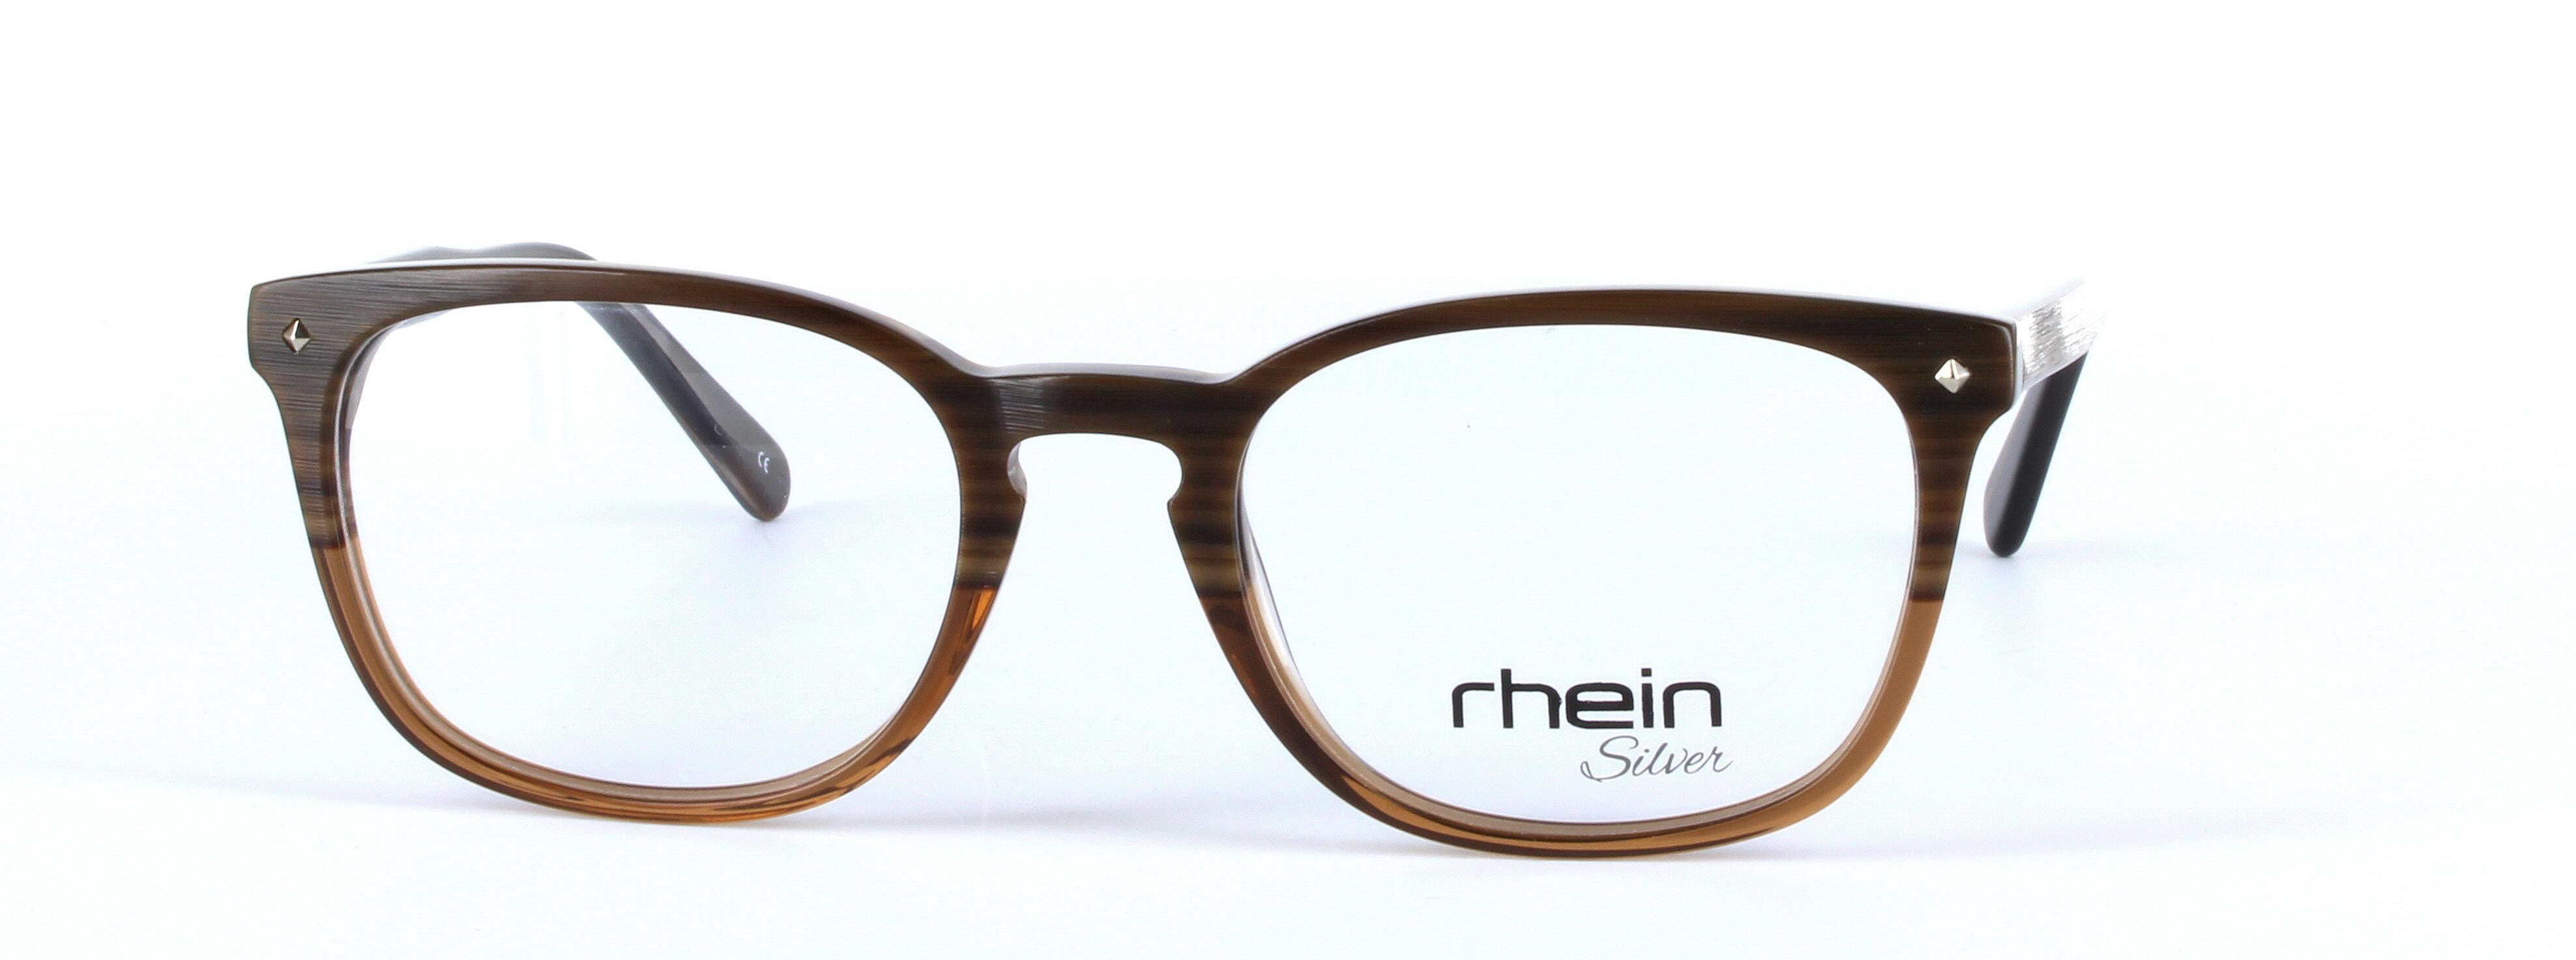 Comet Brown and Light Brown Full Rim Oval Plastic Glasses - Image View 5